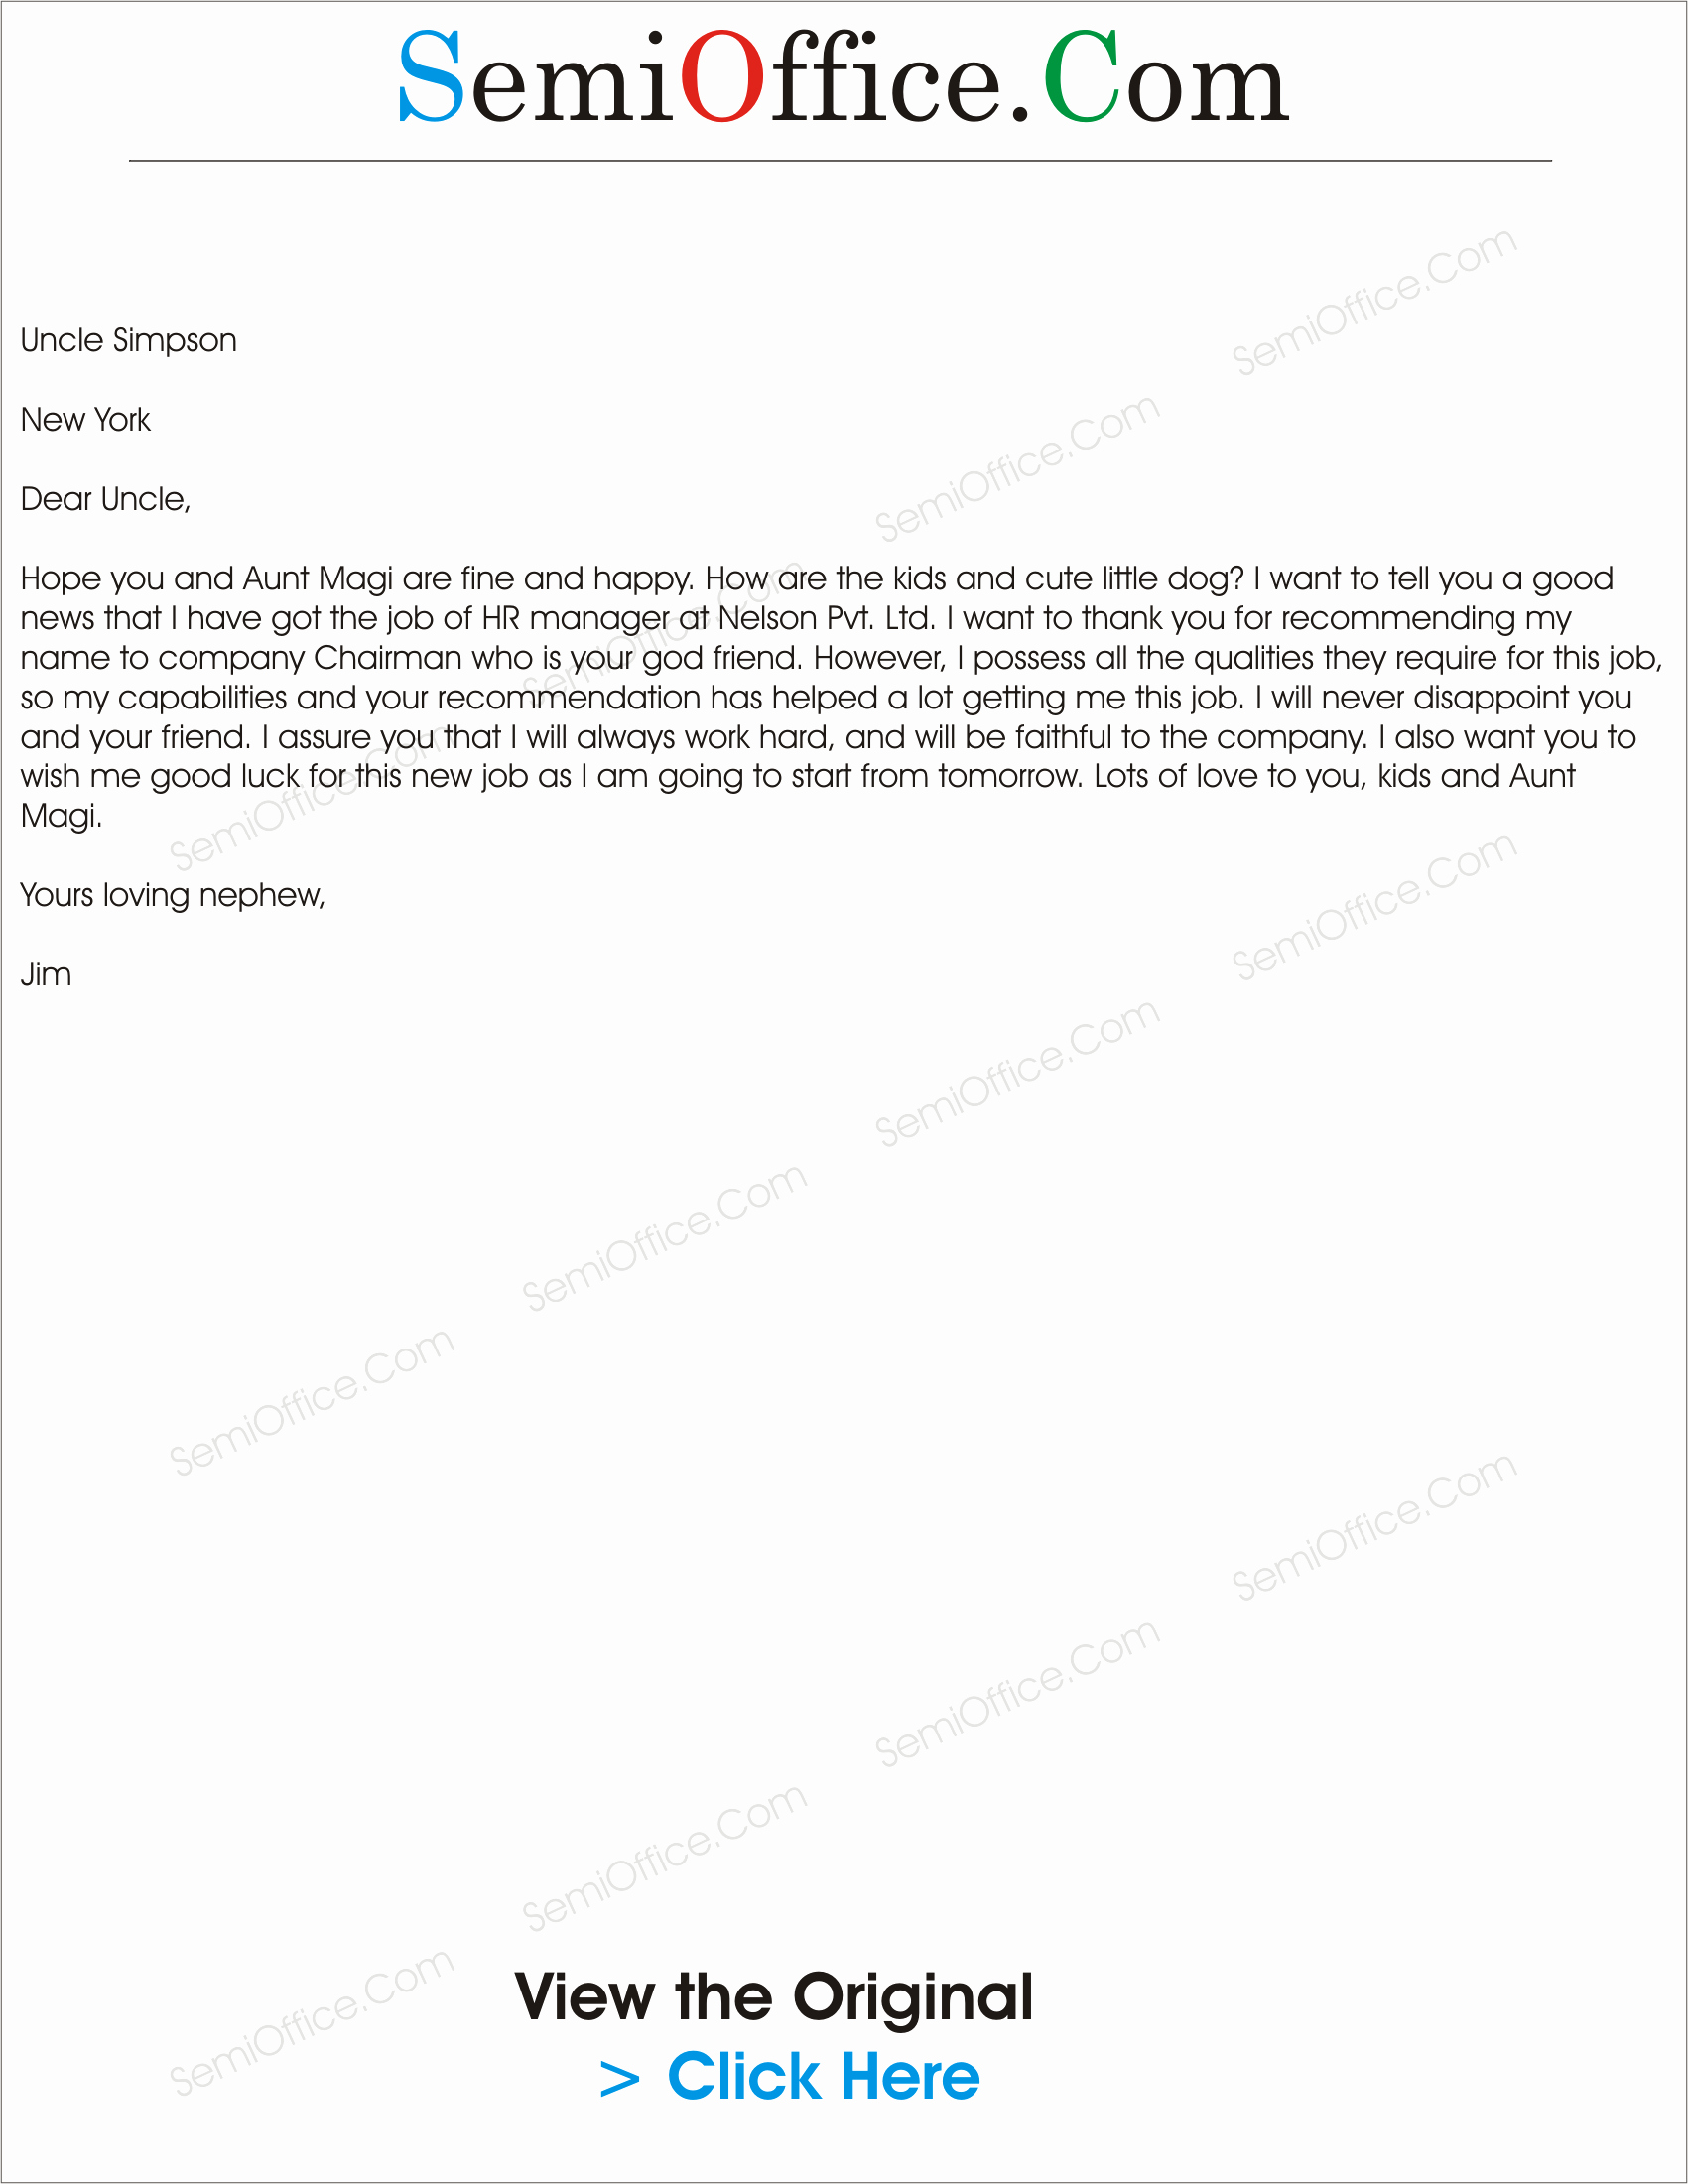 Recommendation Letter Thank You Note Best Of Reference Letters Archives Semi Fice